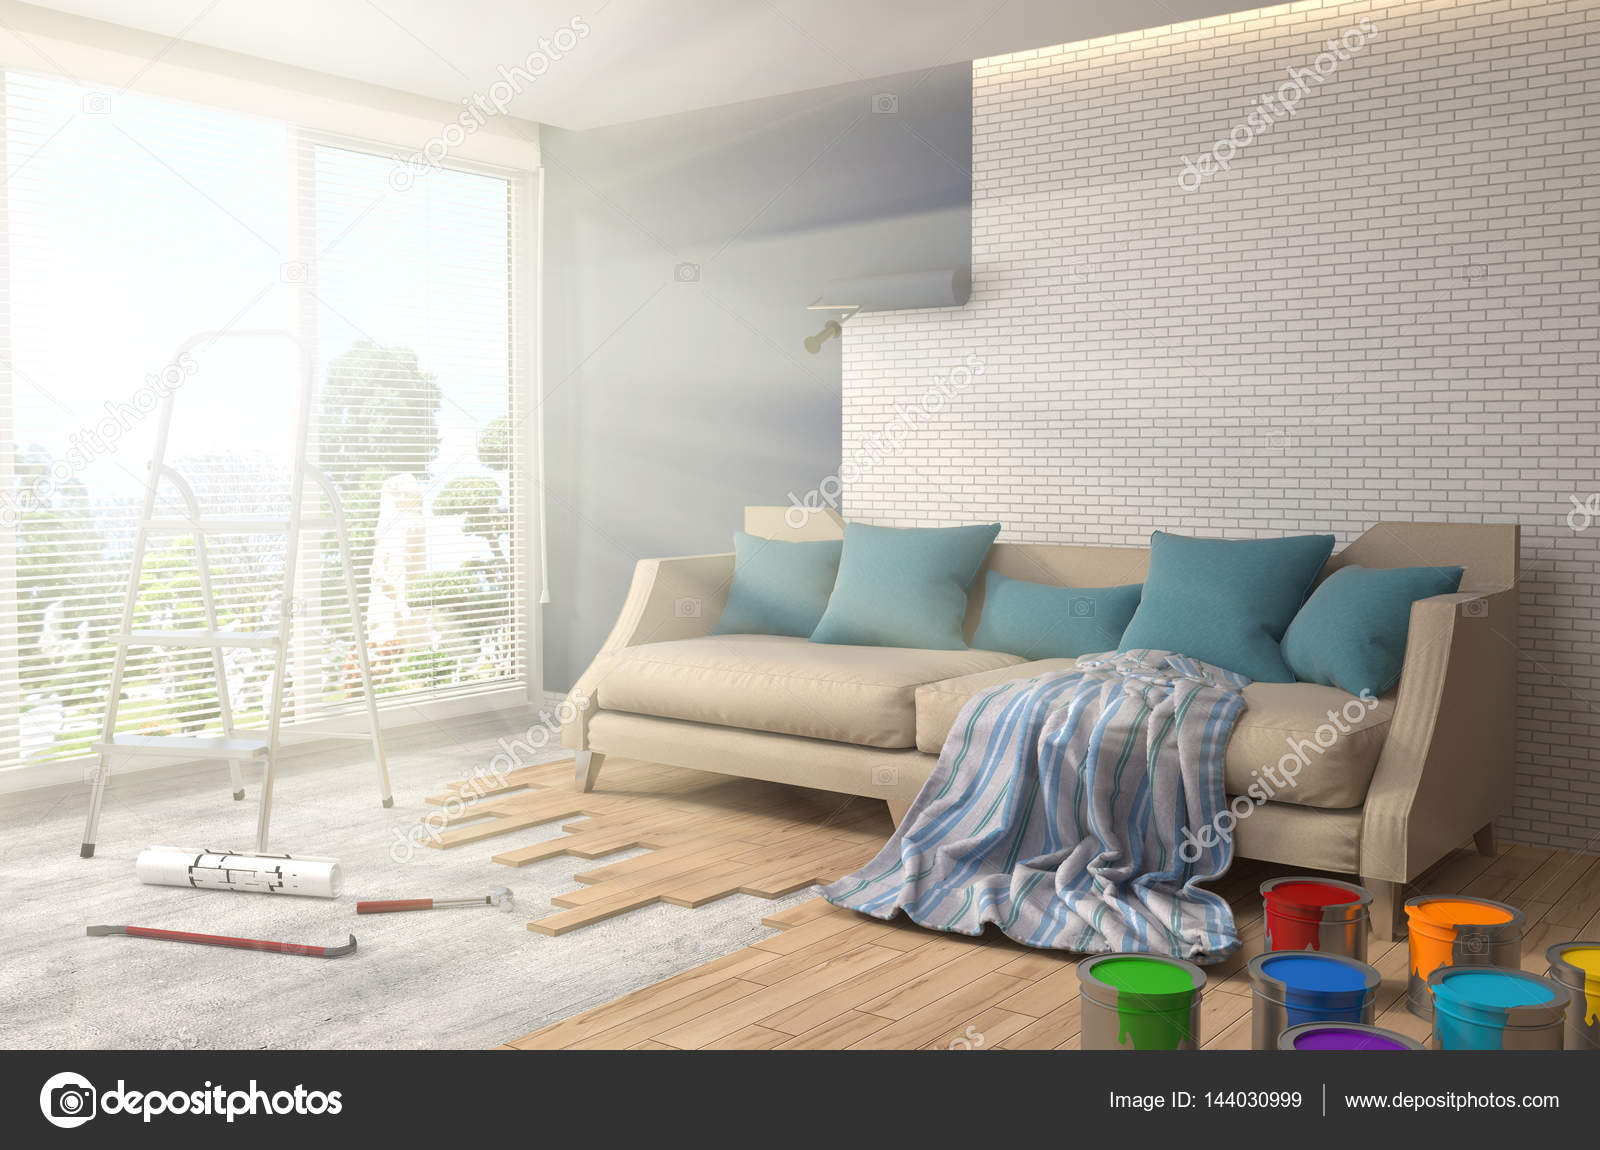 Repair And Painting Of Walls In Room 3d Illustration Stock